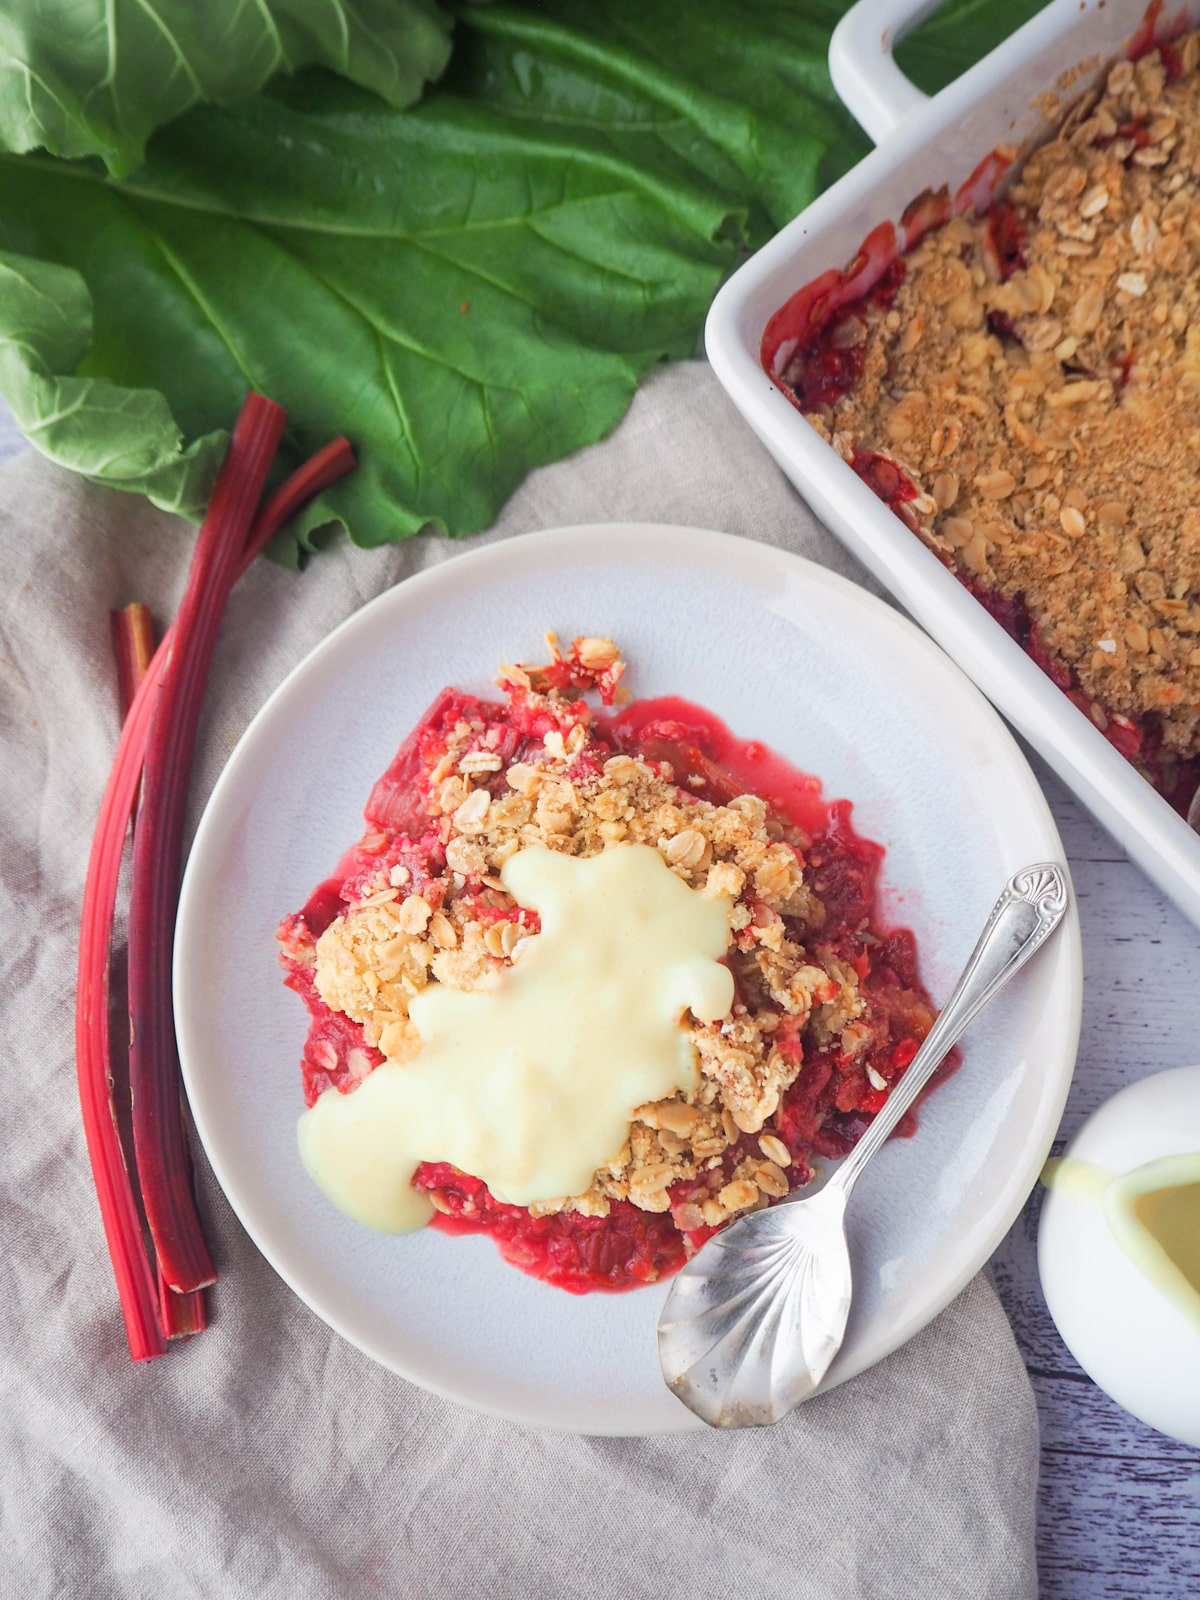 Top down view of serving rhubarb crumble with custard and fresh rhubarb, baking dish of crumble and jug of custard on the side.